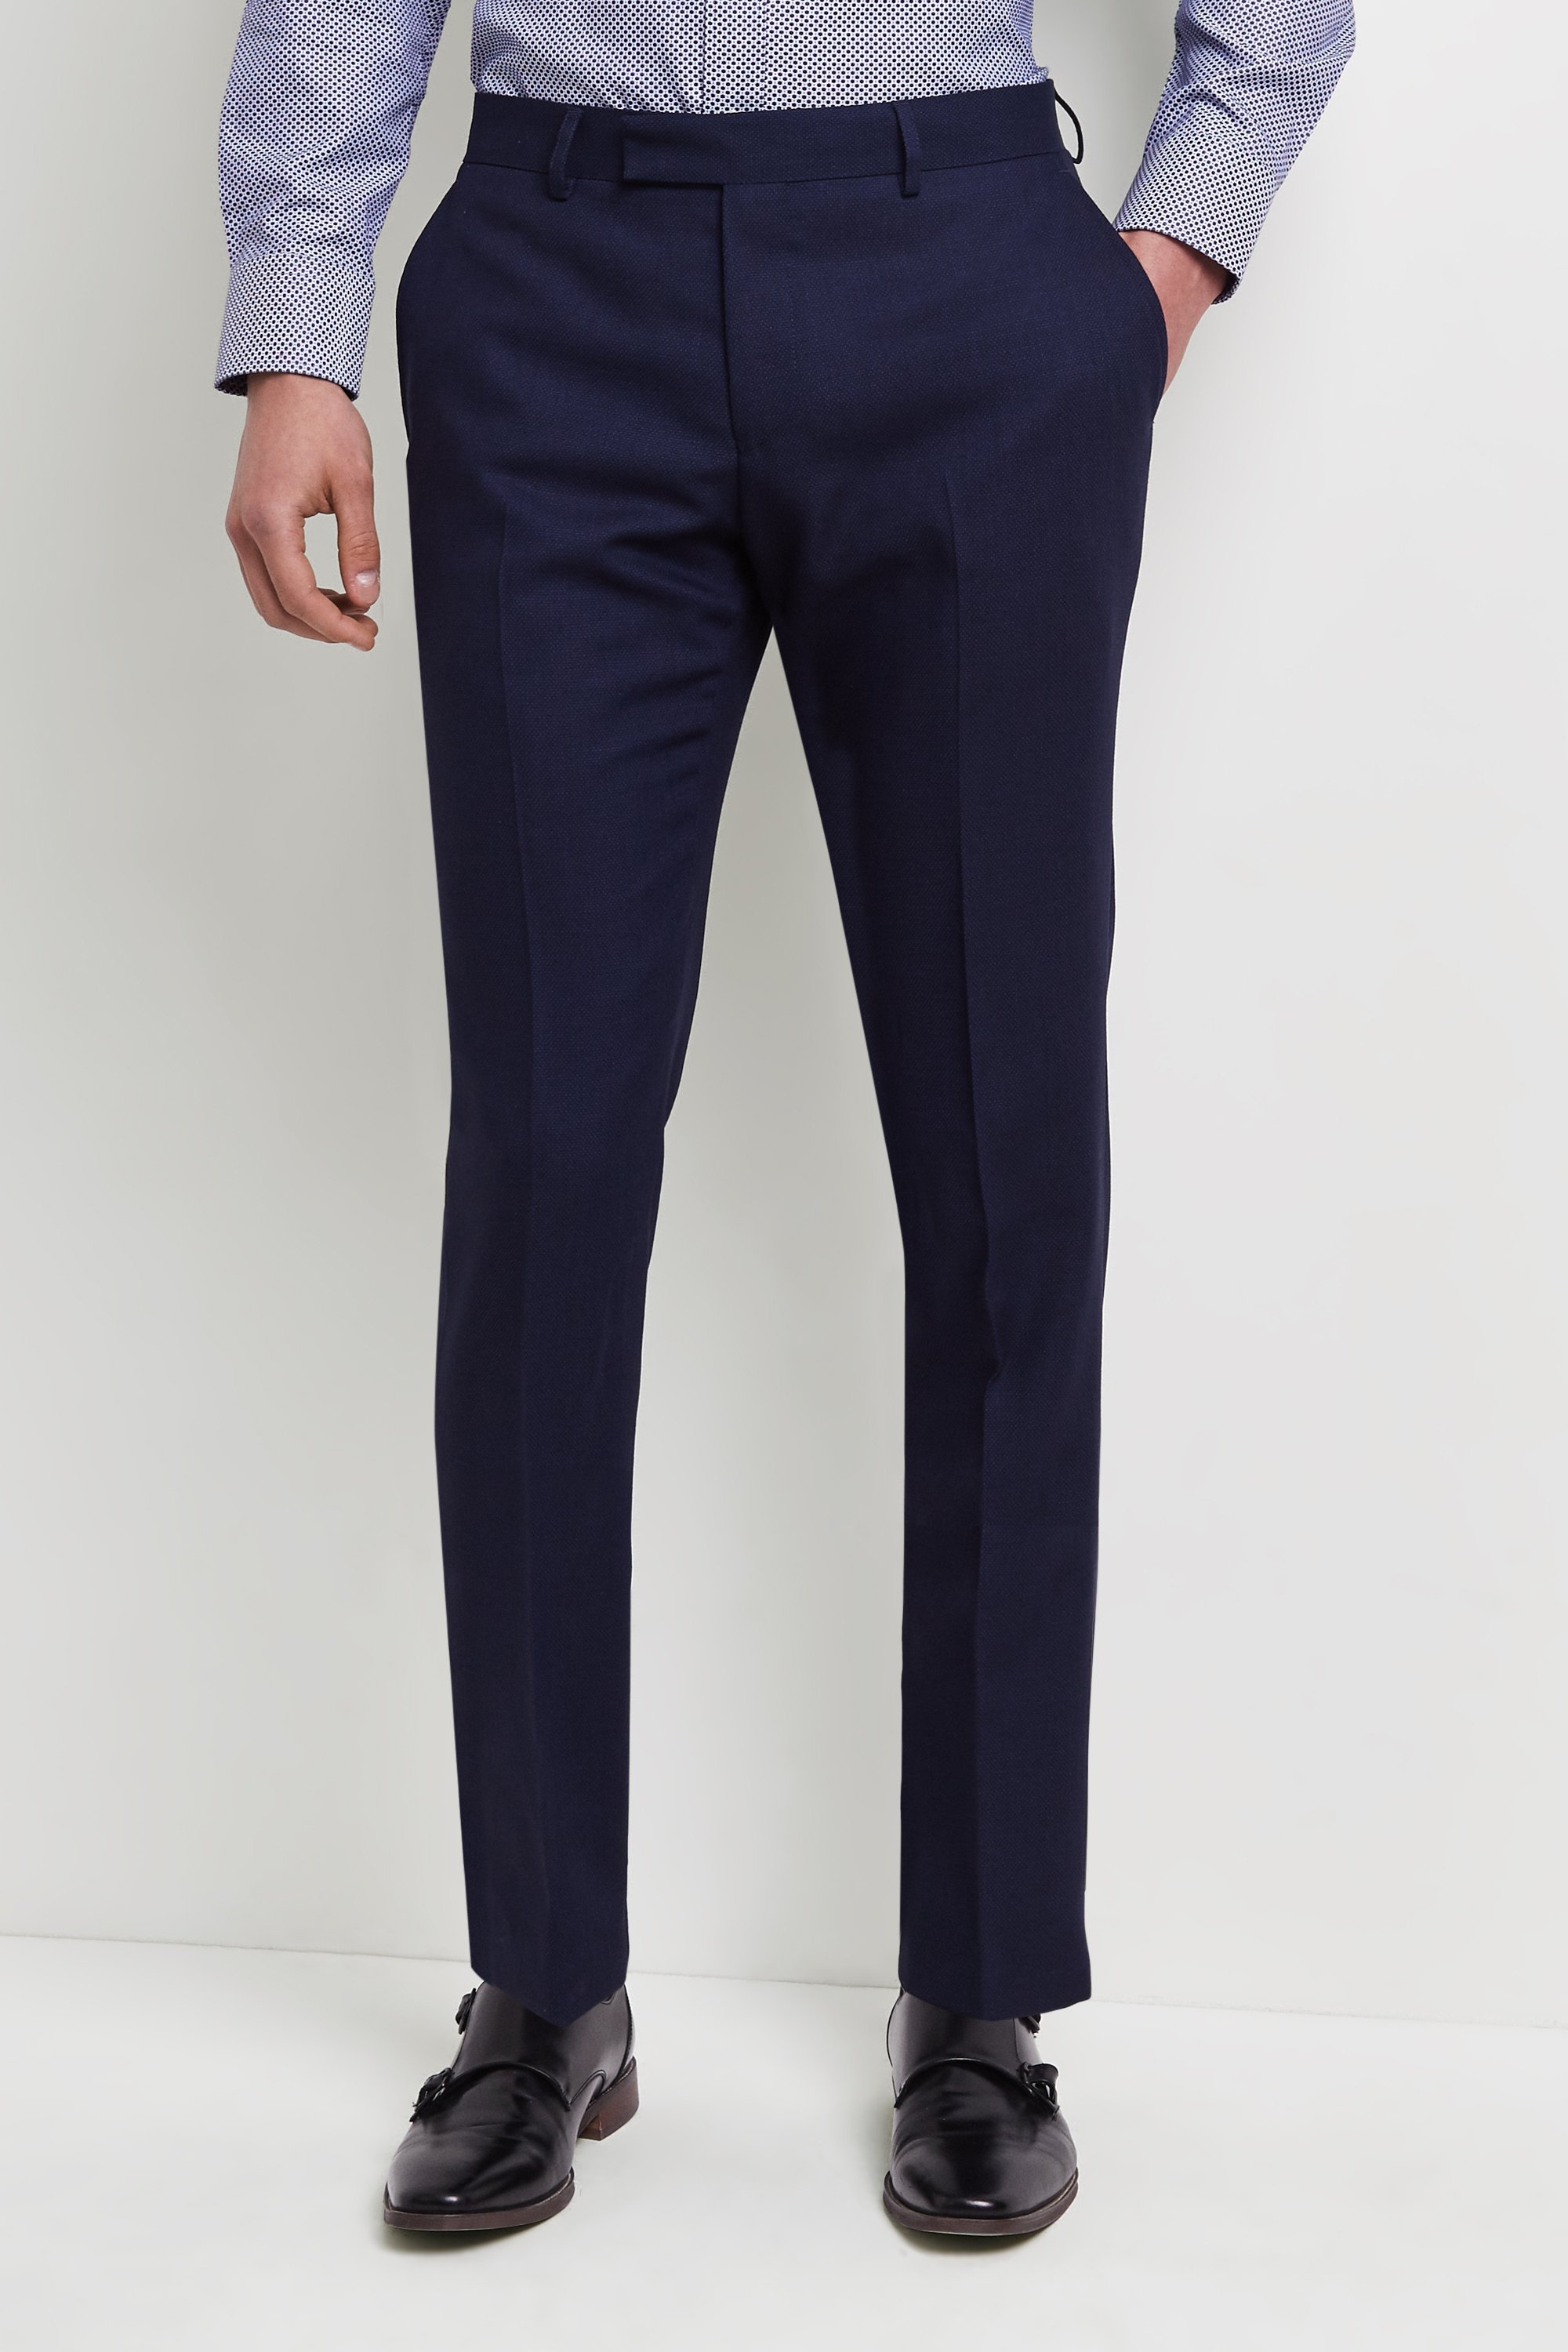 Moss 1851 Tailored Fit Navy Birdseye Trousers | Buy Online at Moss